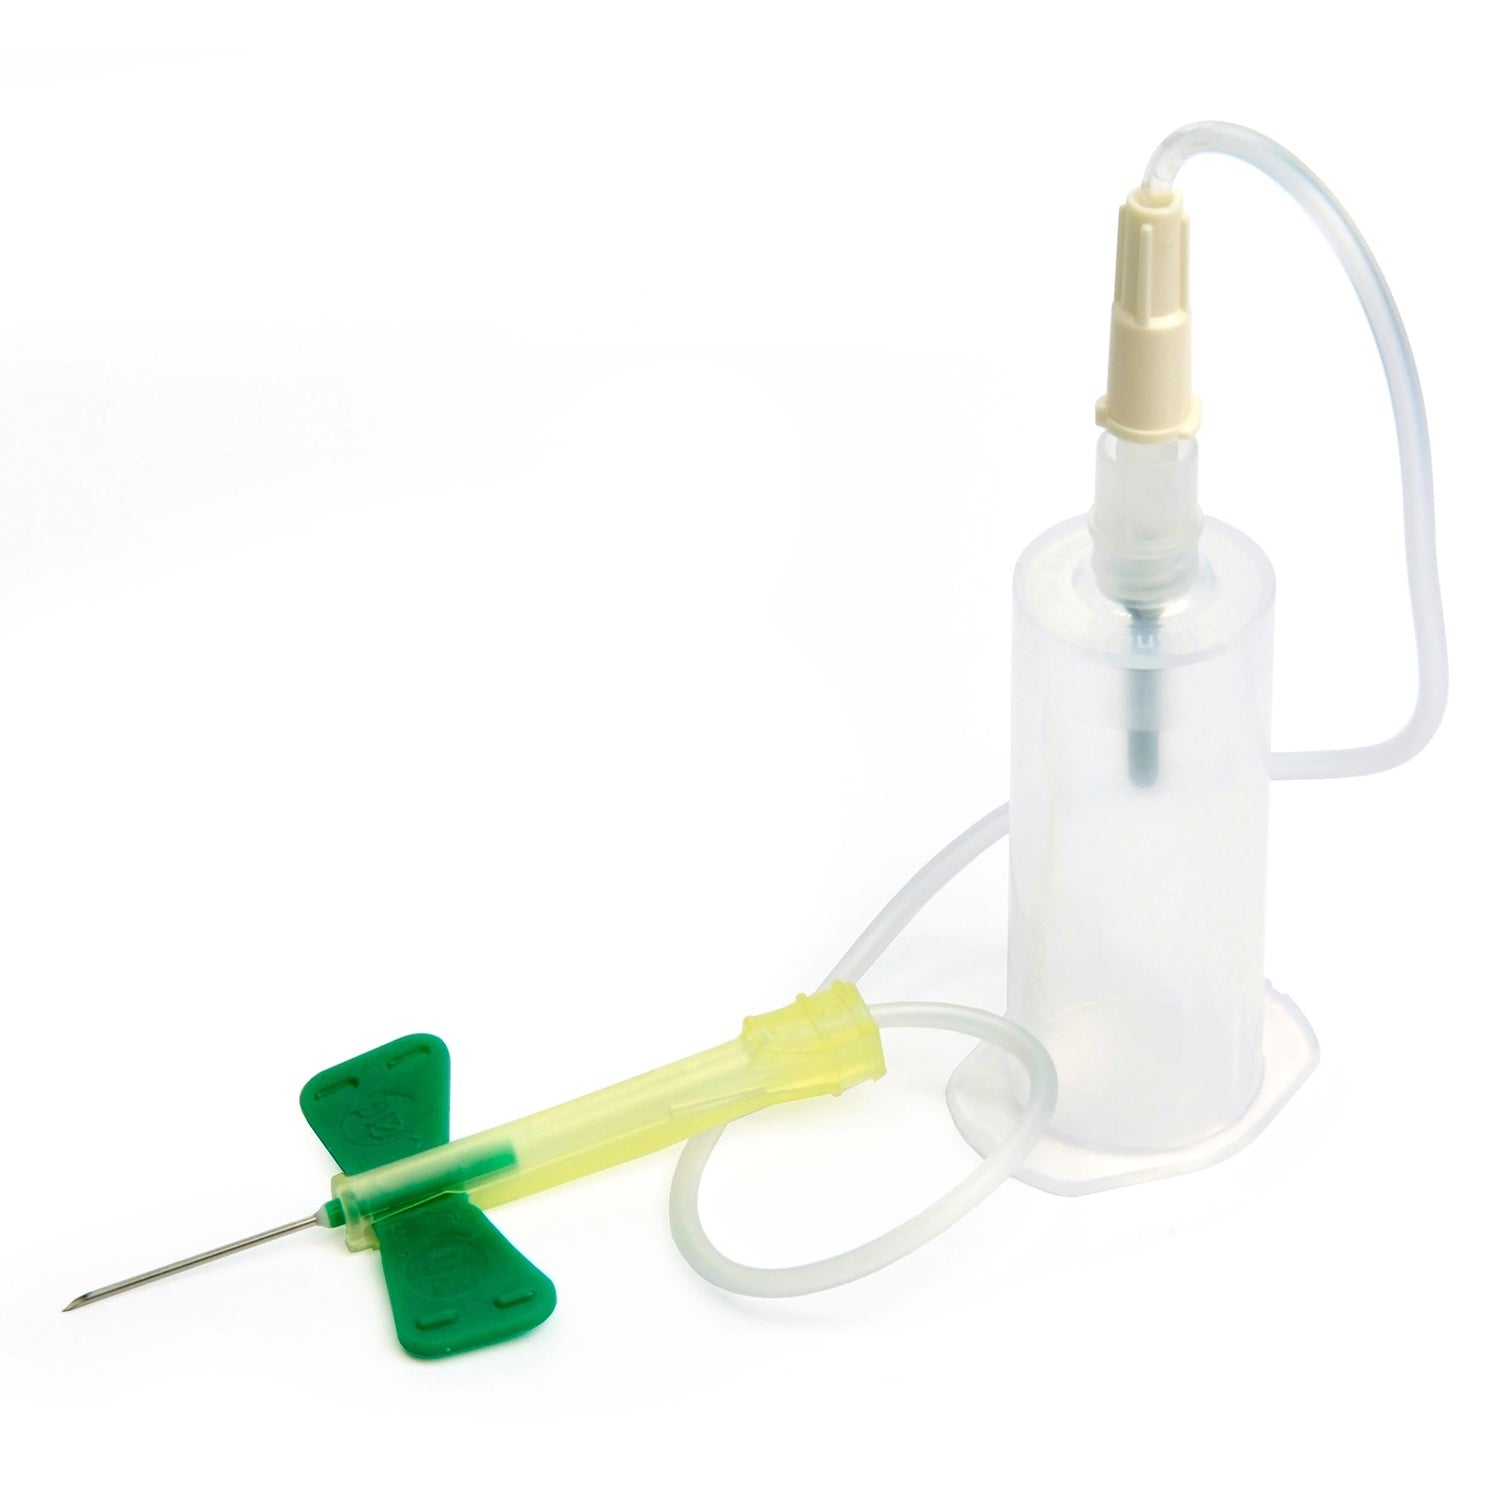 BD Vacutainer Safety Lok Blood Collection System | 0.75" Needle | 21G x 7" Tubing | Pack of 50 (3)